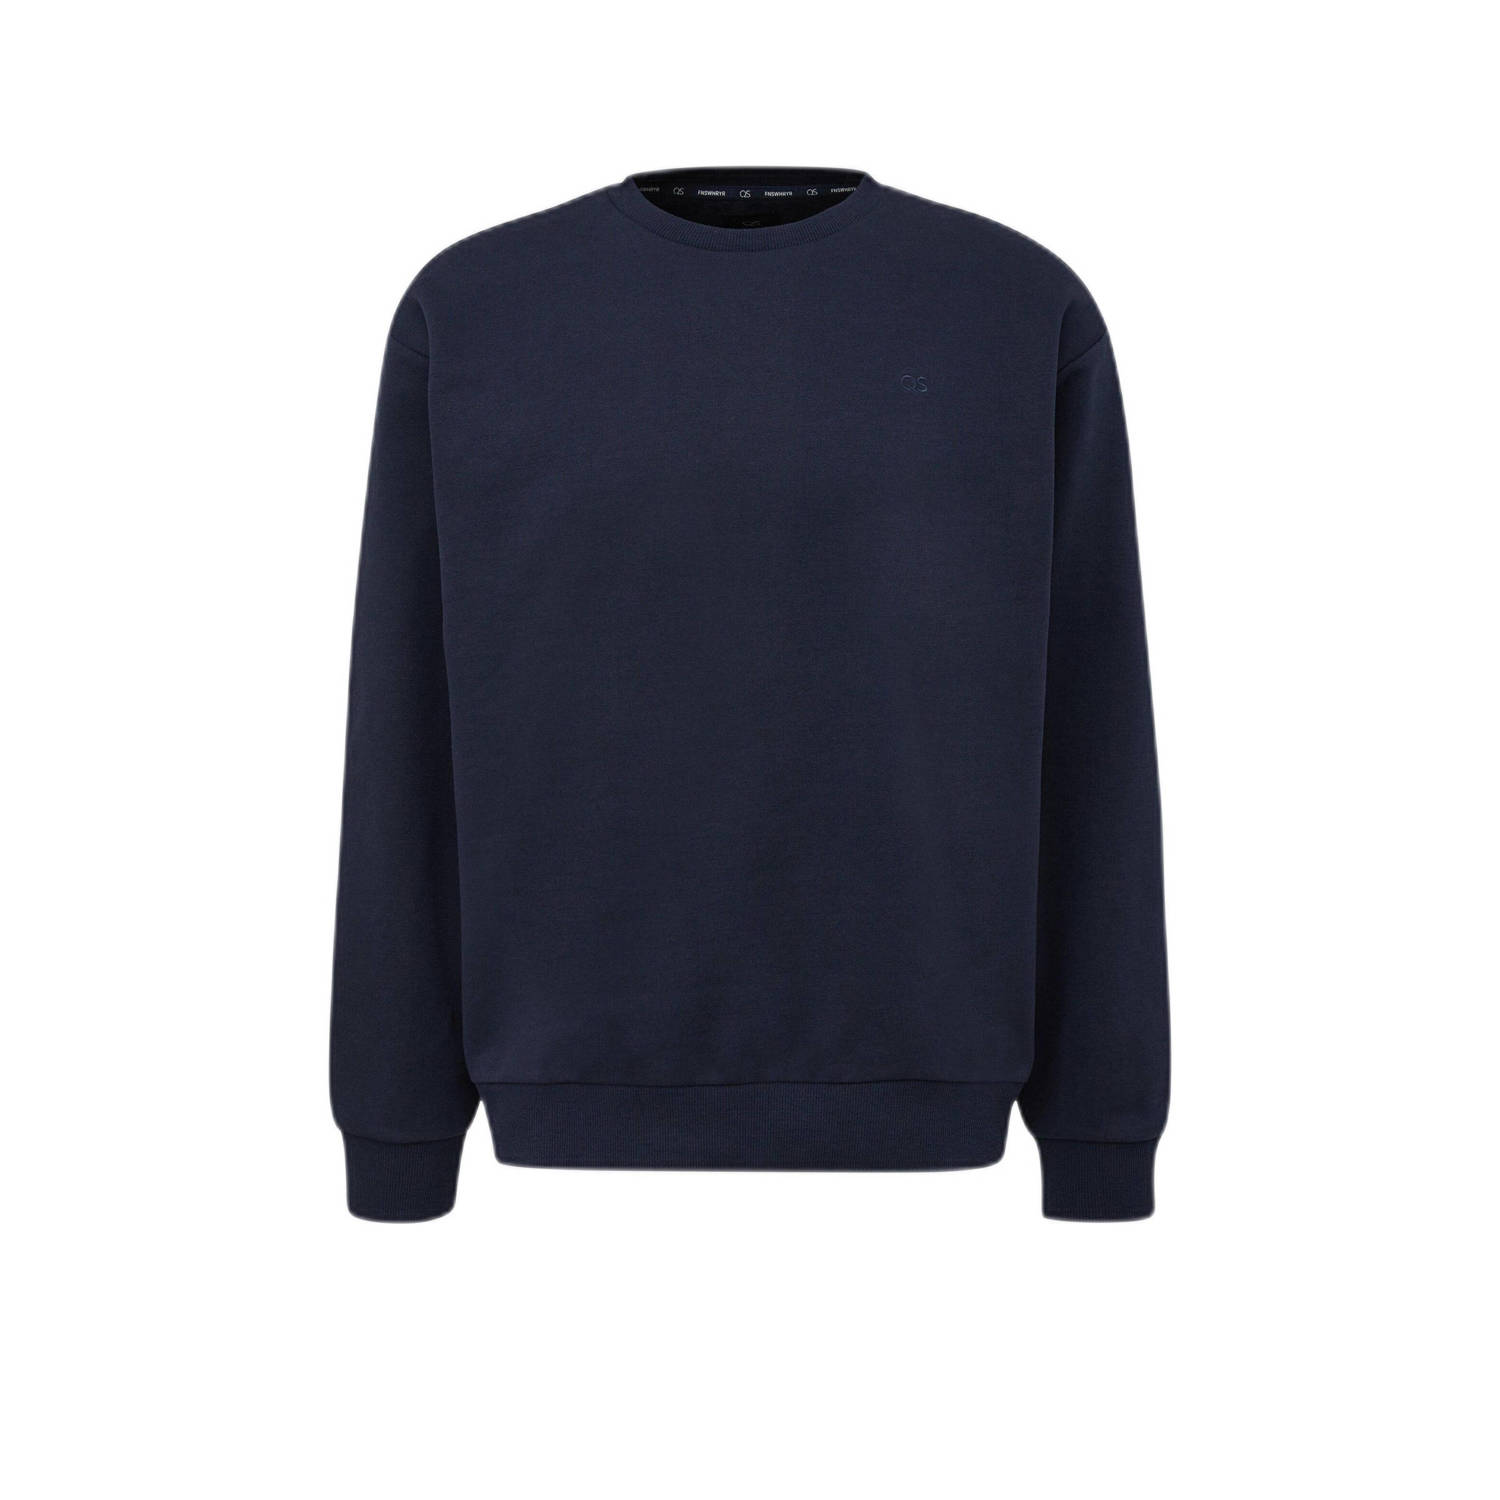 Q S by s.Oliver sweater donkerblauw